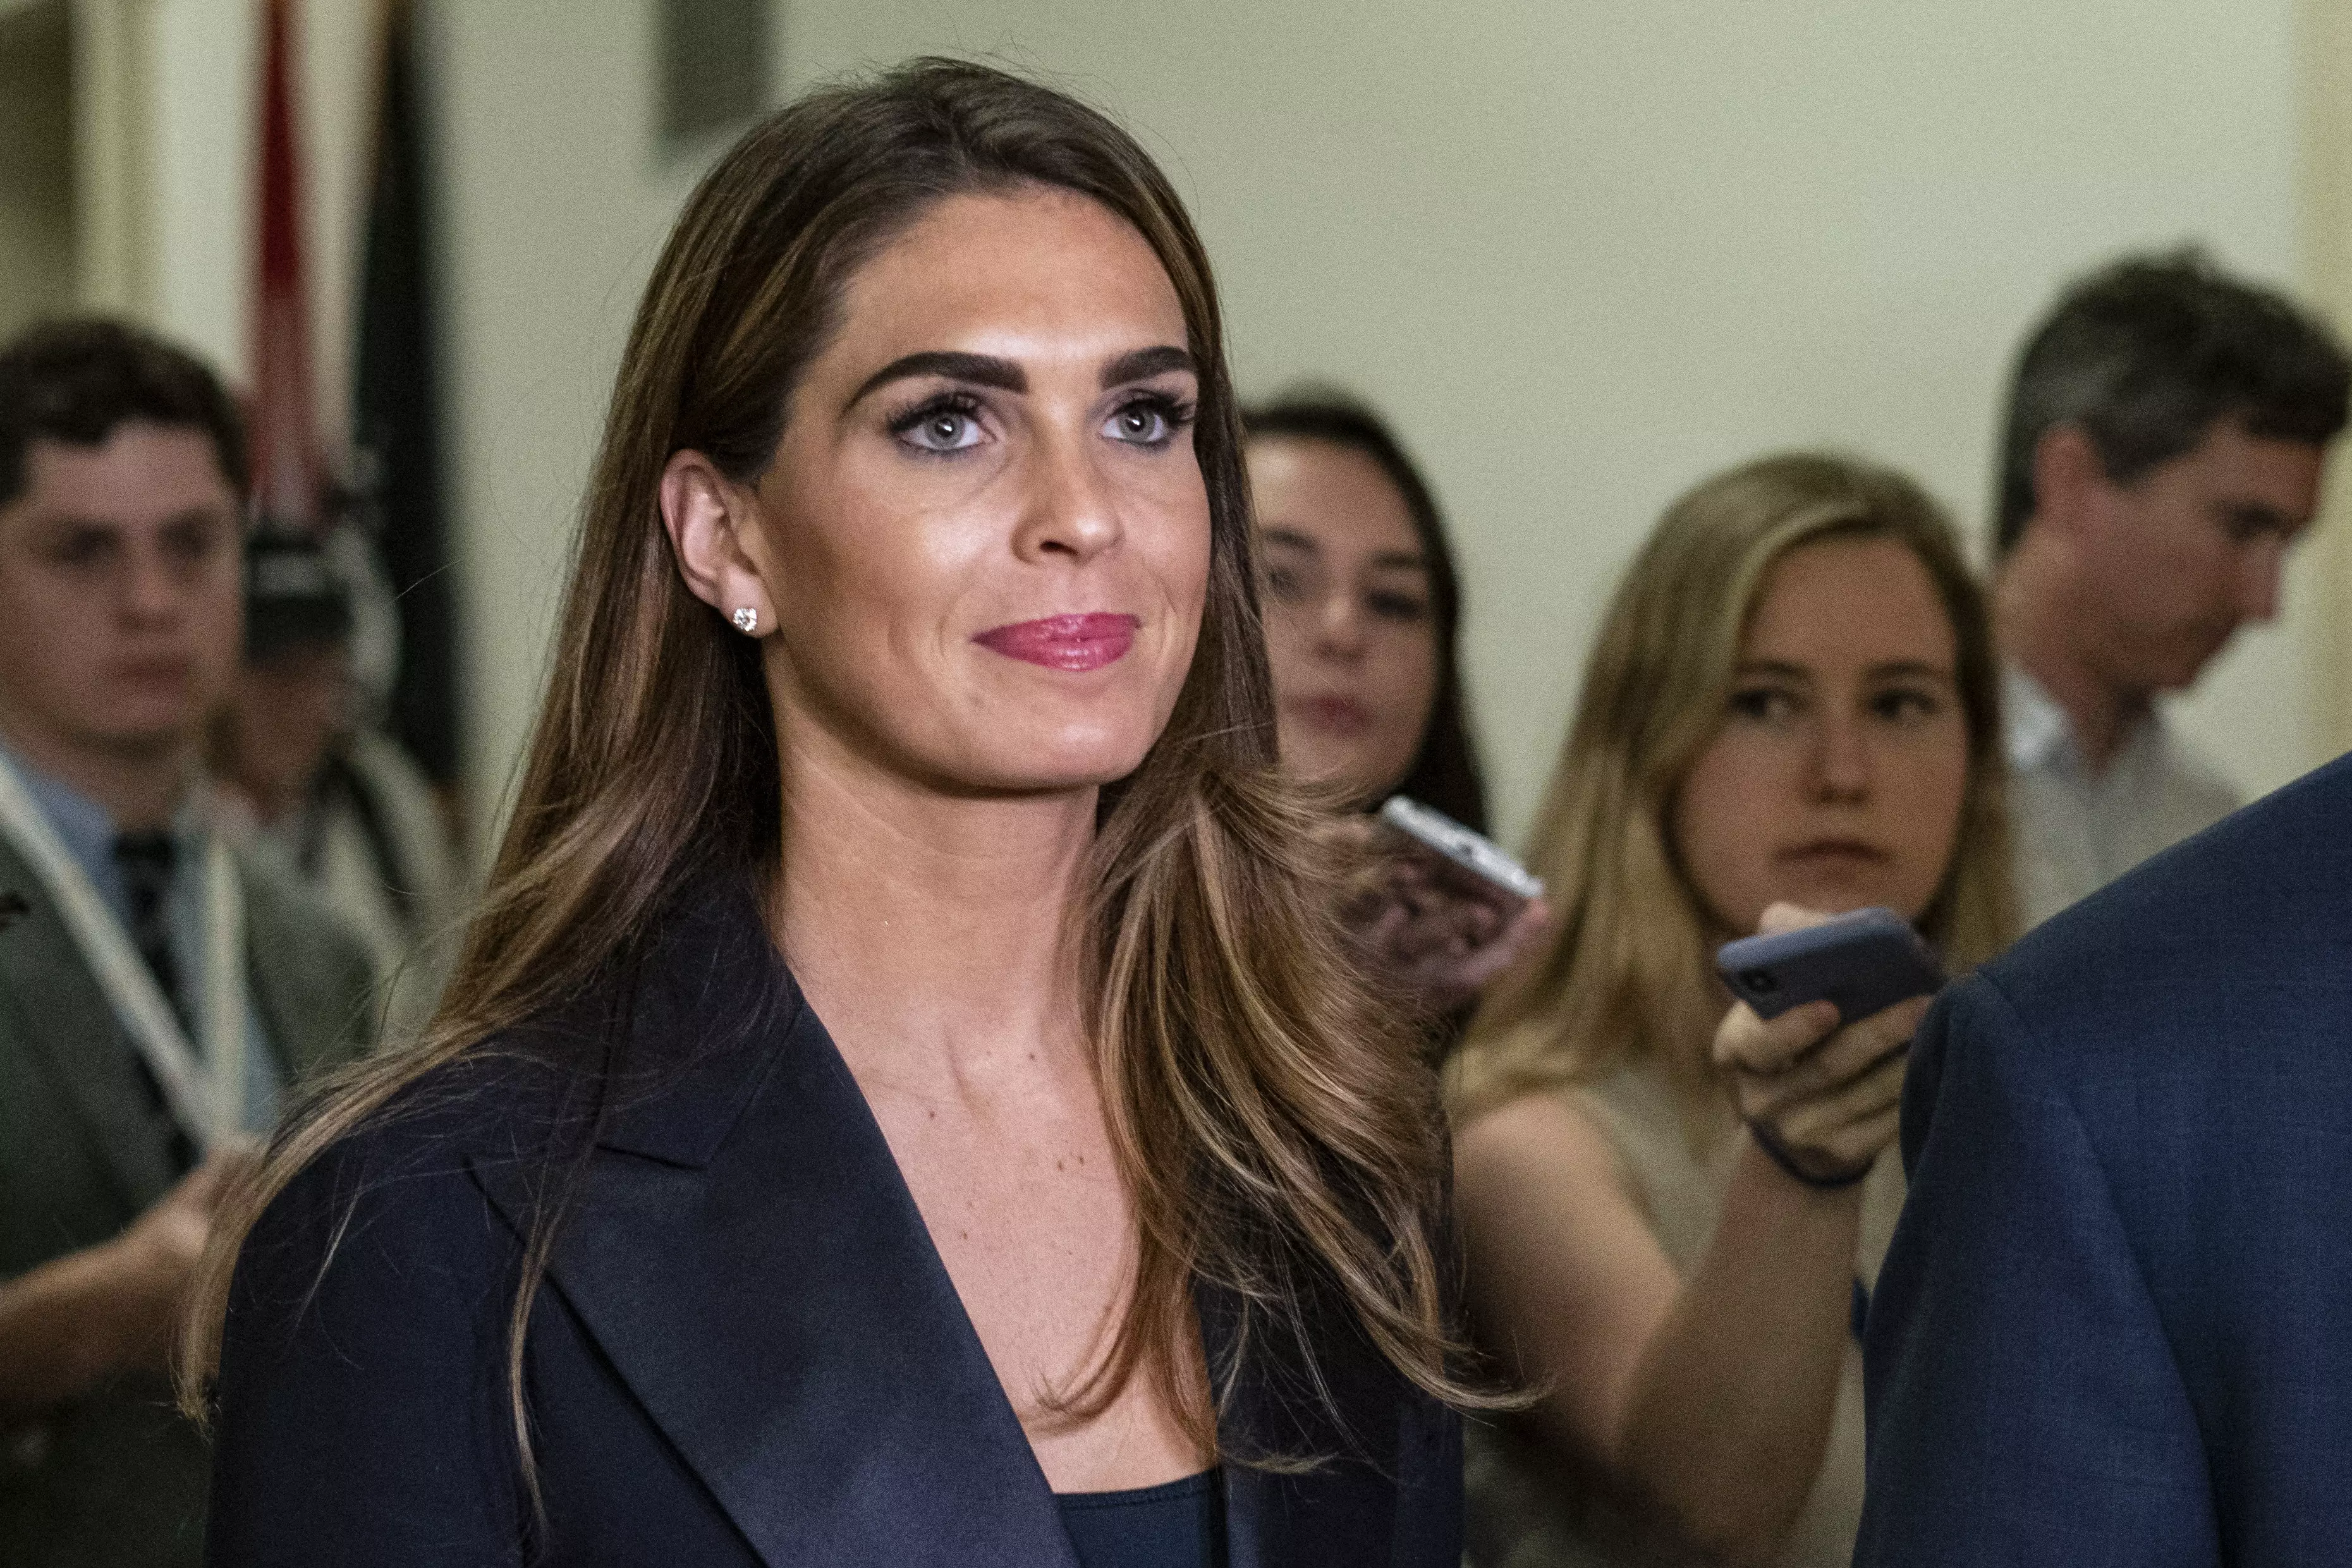 President Trump went into quarantine after his aide Hope Hicks tested positive for Covid-19.